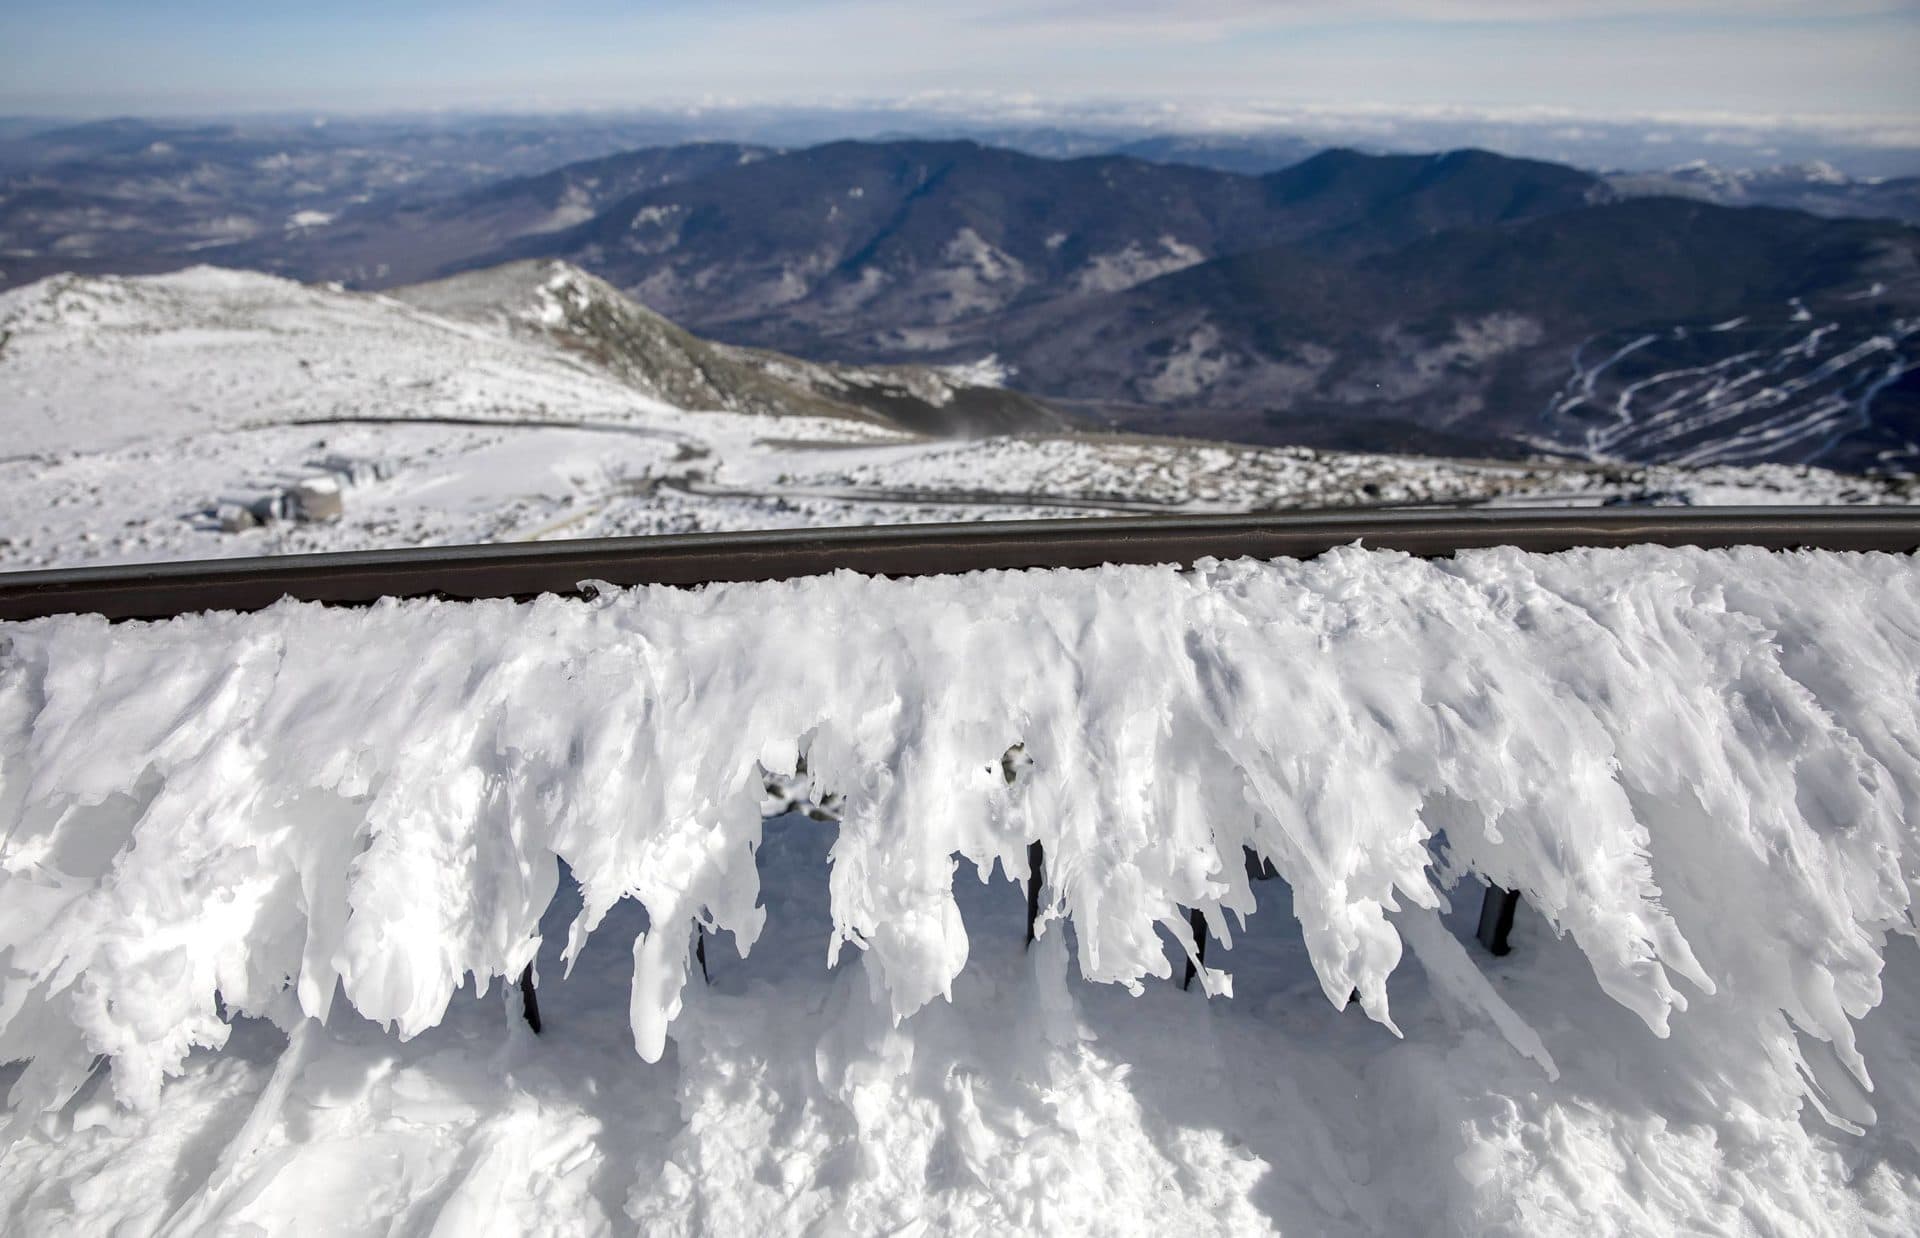 Rime ice, shaped by the wind, on the railings of the Mount Washington Observatory. (Robin Lubbock/WBUR)